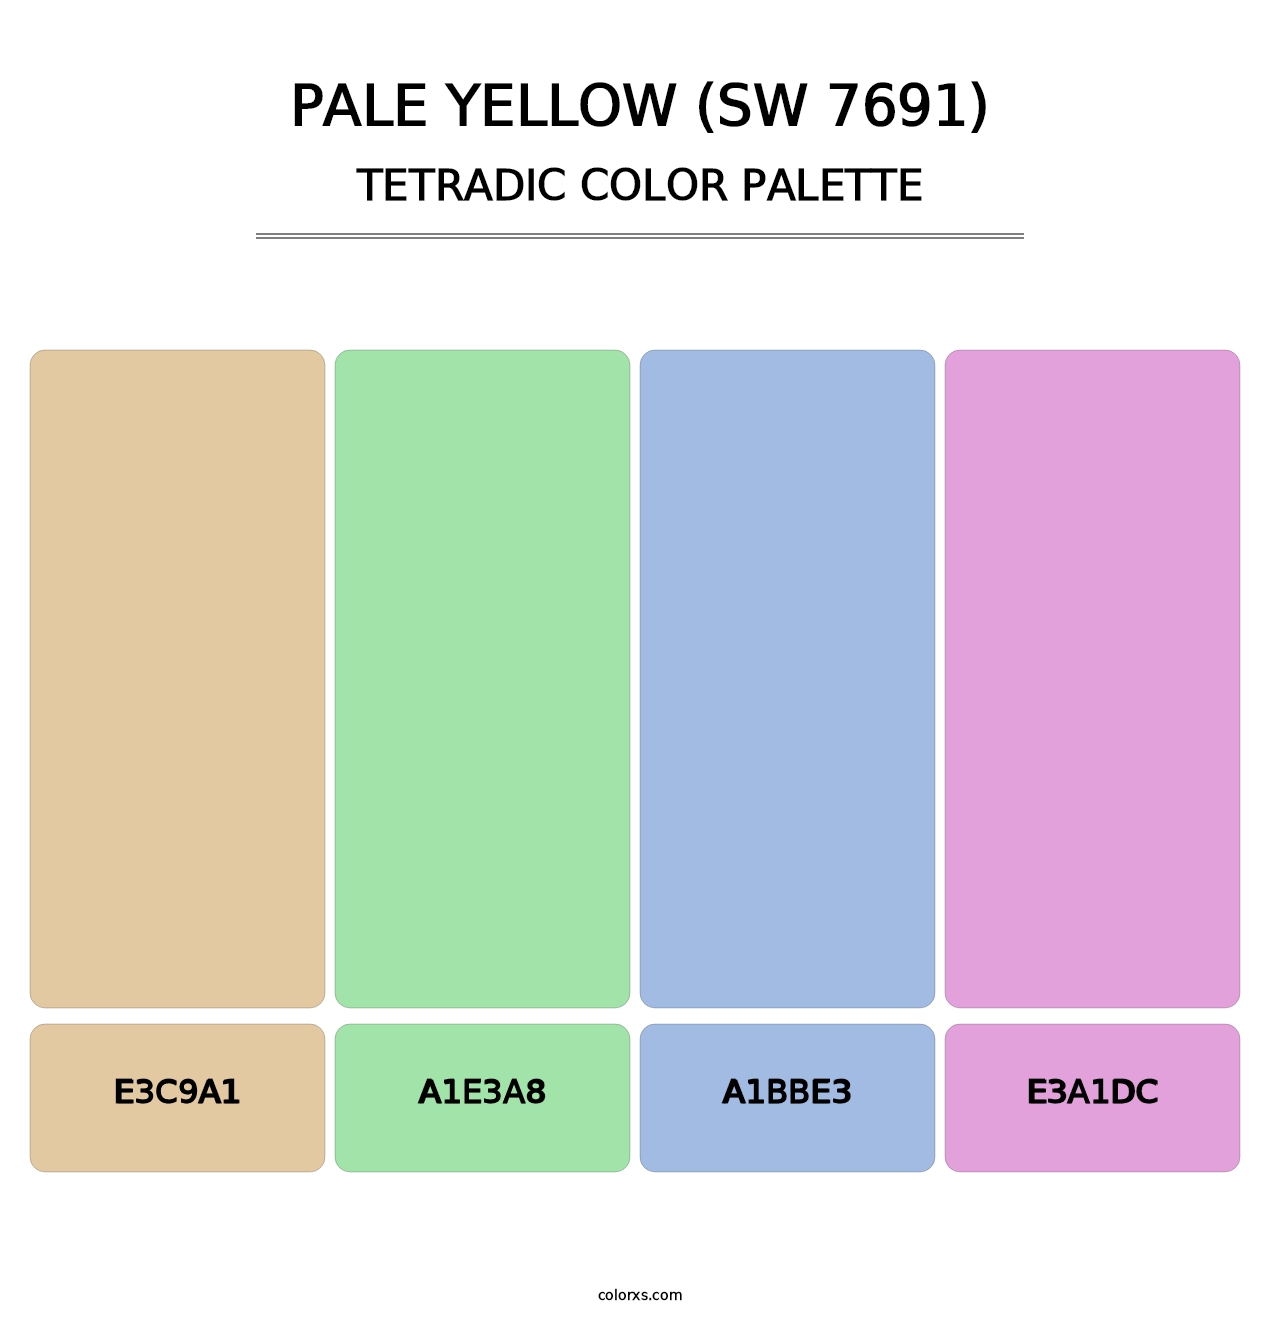 Pale Yellow (SW 7691) - Tetradic Color Palette